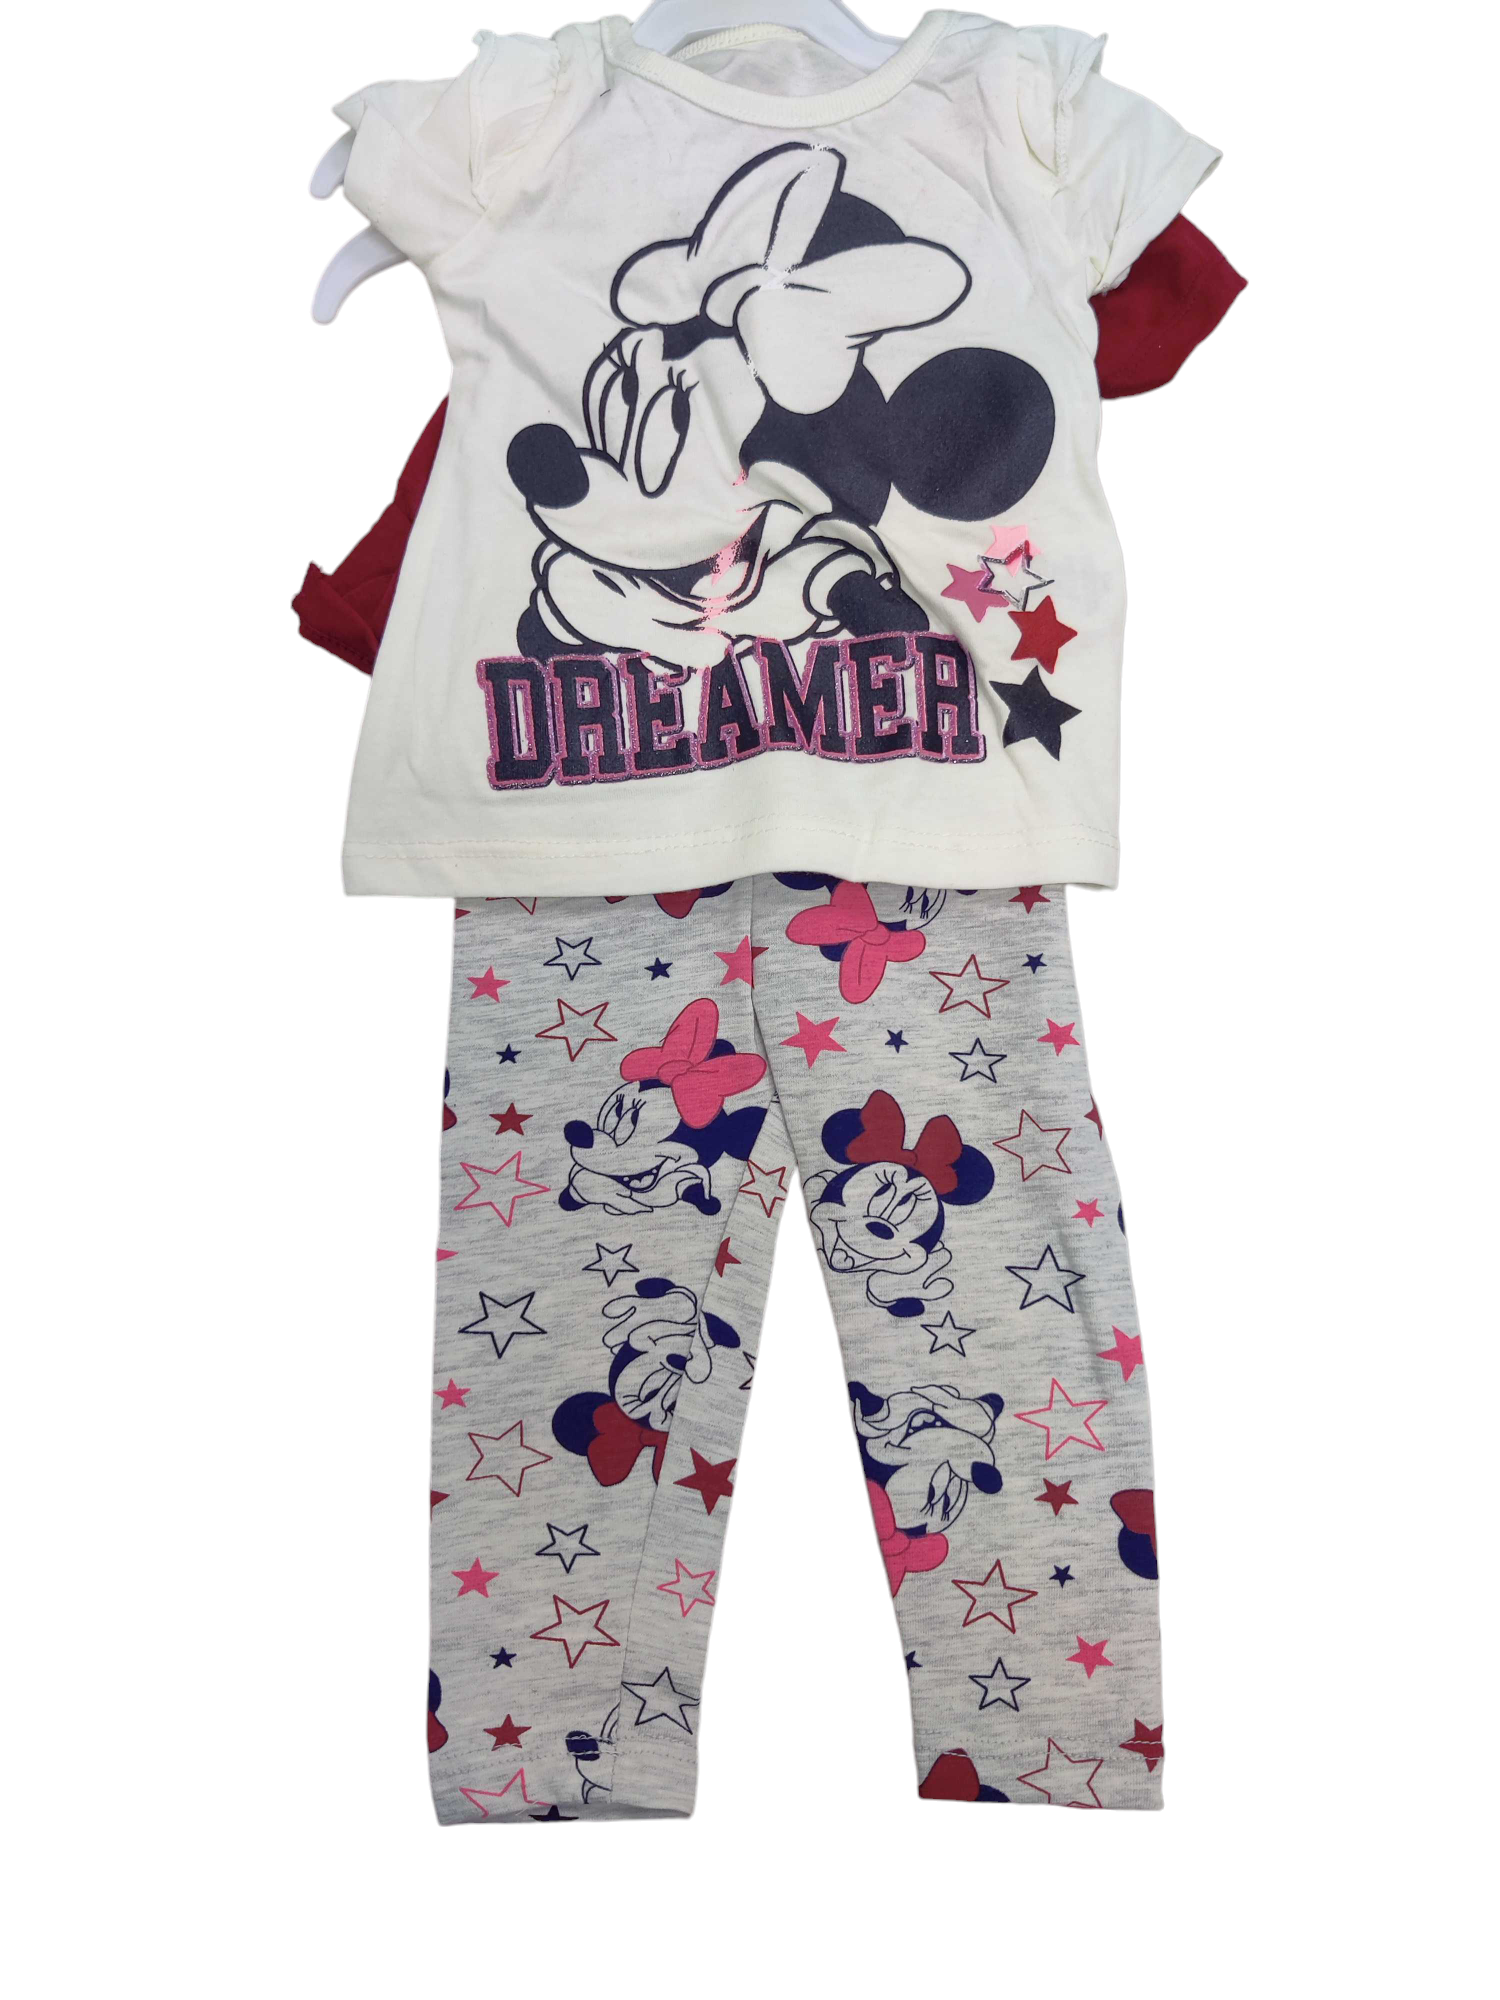 Dreamer  Minnie Mouse 3 Pack Sleeveless Shirts White/Red